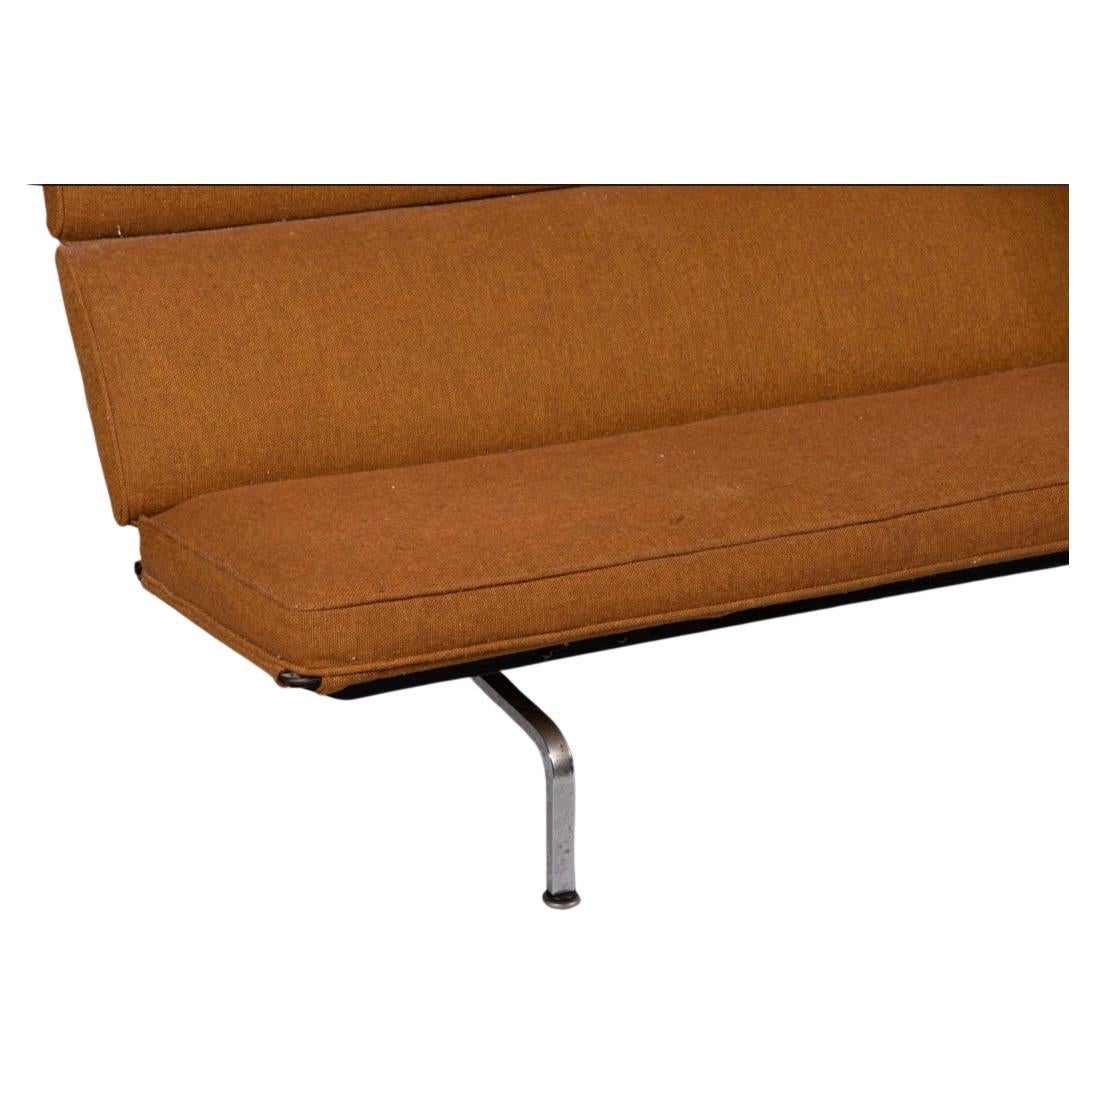 Original Eames sofa compact with orange Herman miller woven upholstery. Charles and Ray Eames compact couch is great design that keeps a subtle profile. The cushioned pads that form the back are reinforced with cord welting and the seat cushions are